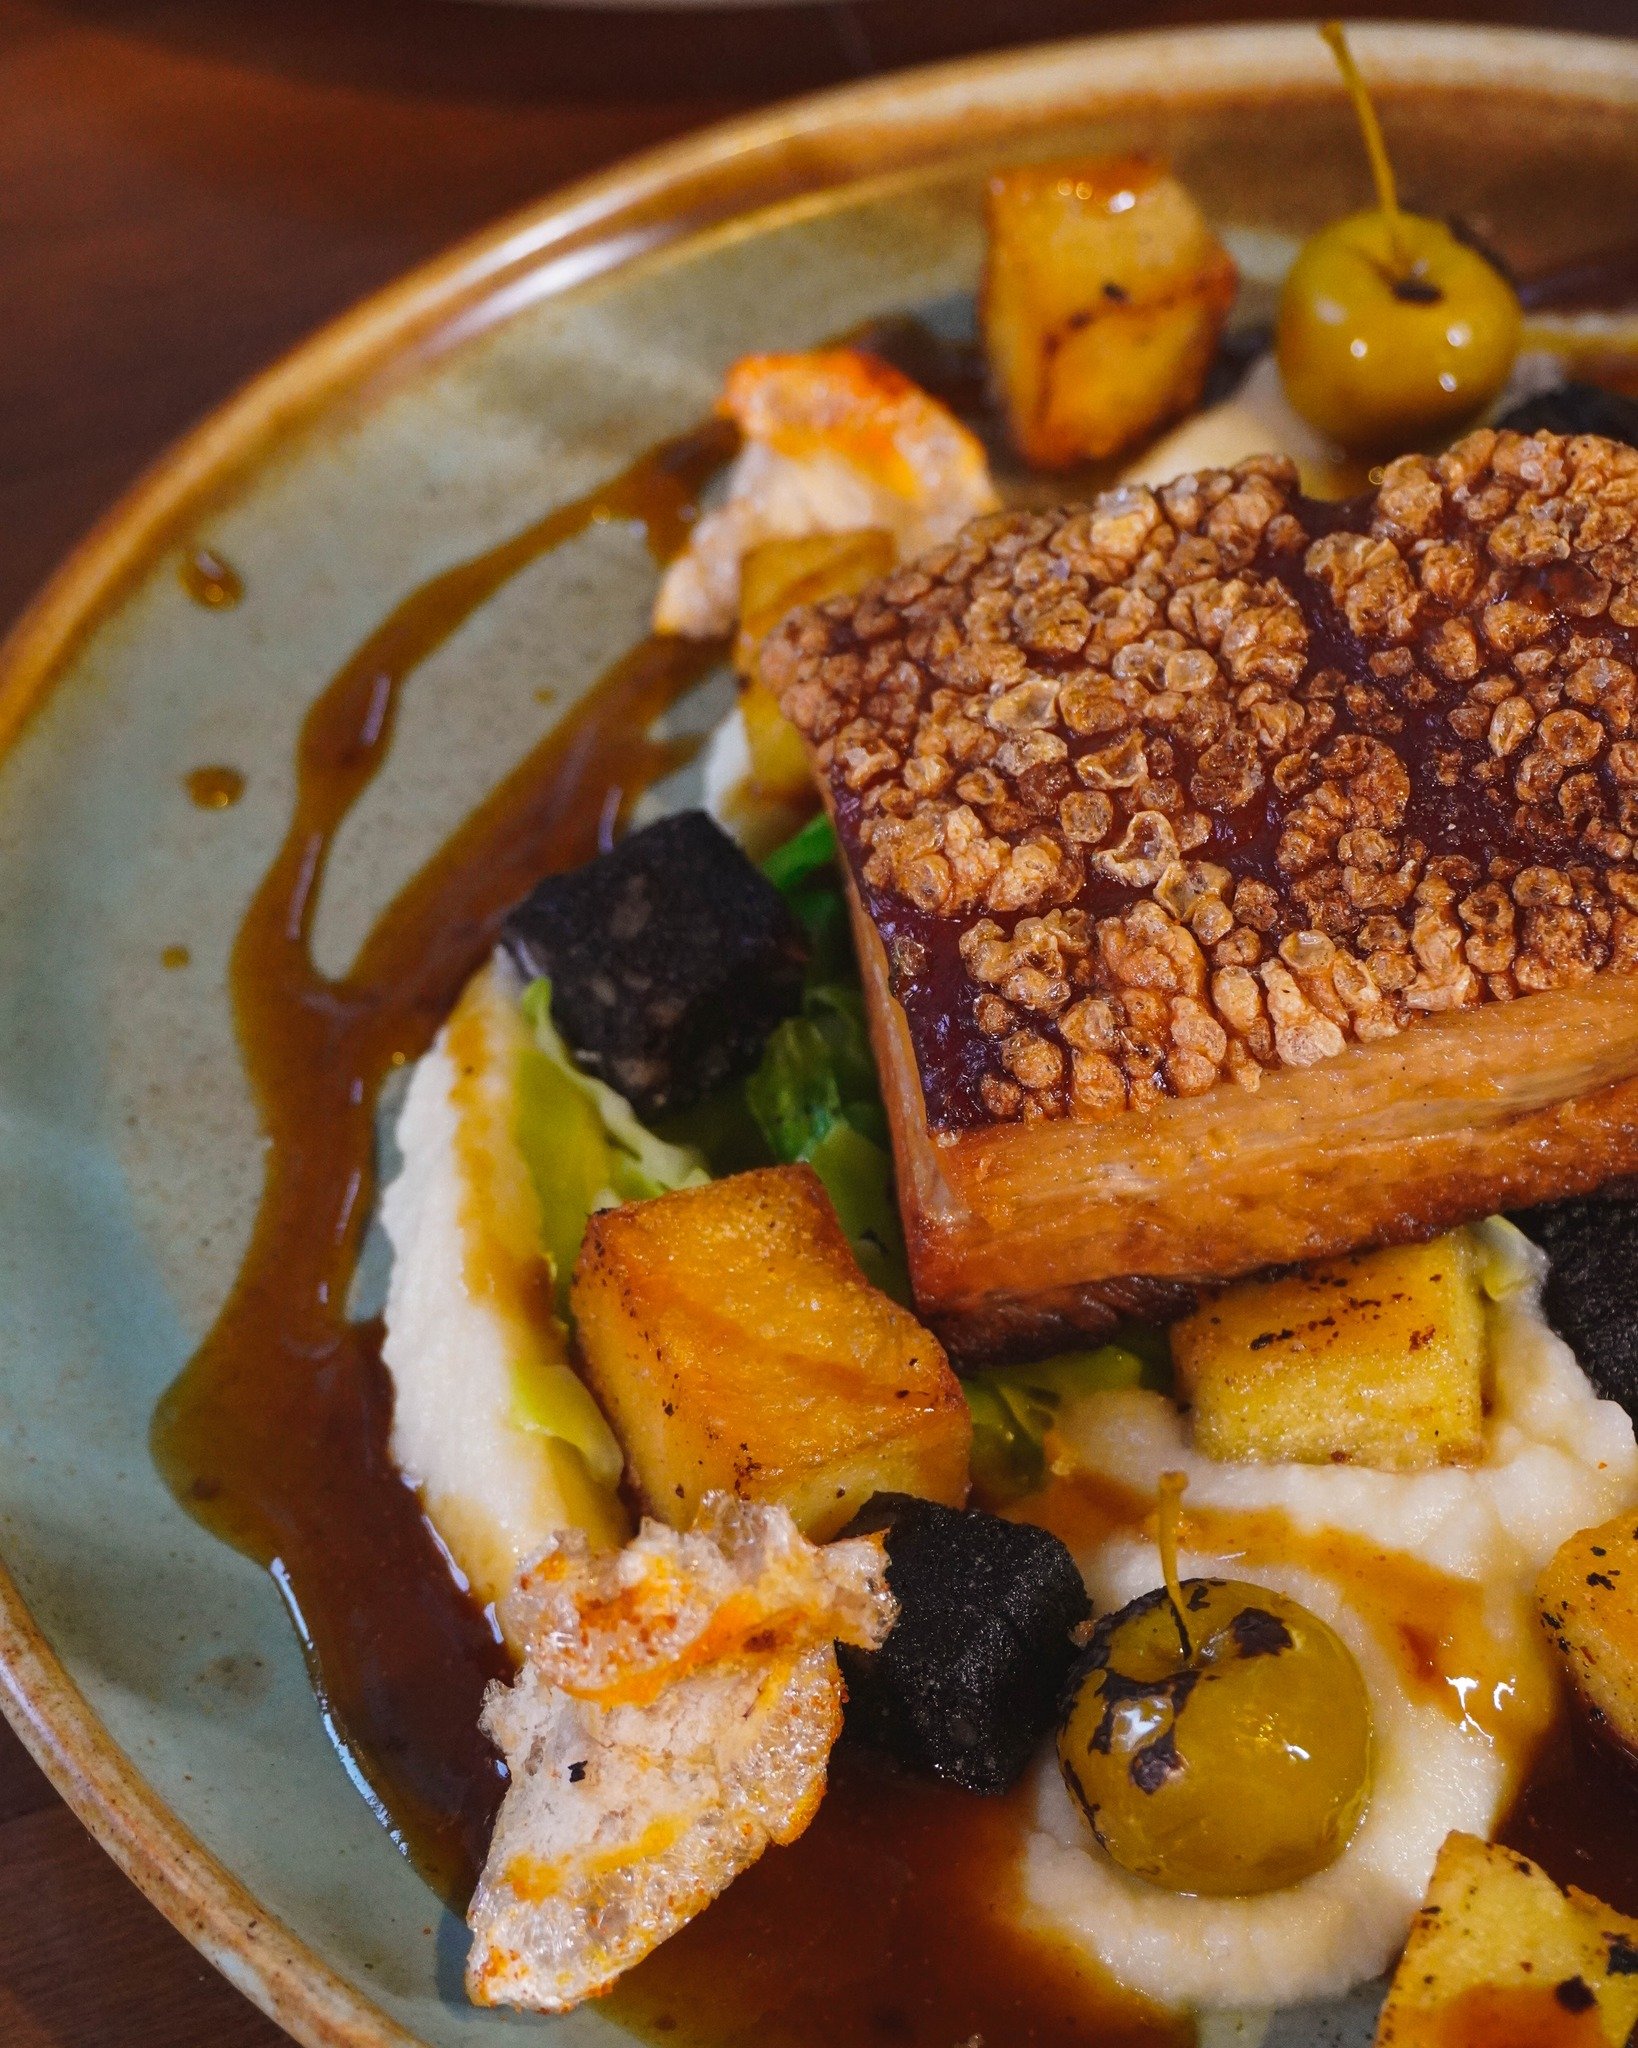 What comfort food would you choose? 🤔

Delicious  crispy Pork Belly 🍏
Served on a bed of Cider gel, cauliflower puree, sour apple, and black pudding hash.

OR

Herb Crusted Lamb Rack 🌸
Braised lamb shoulder, pomme puree, peas, broad beans &amp; as